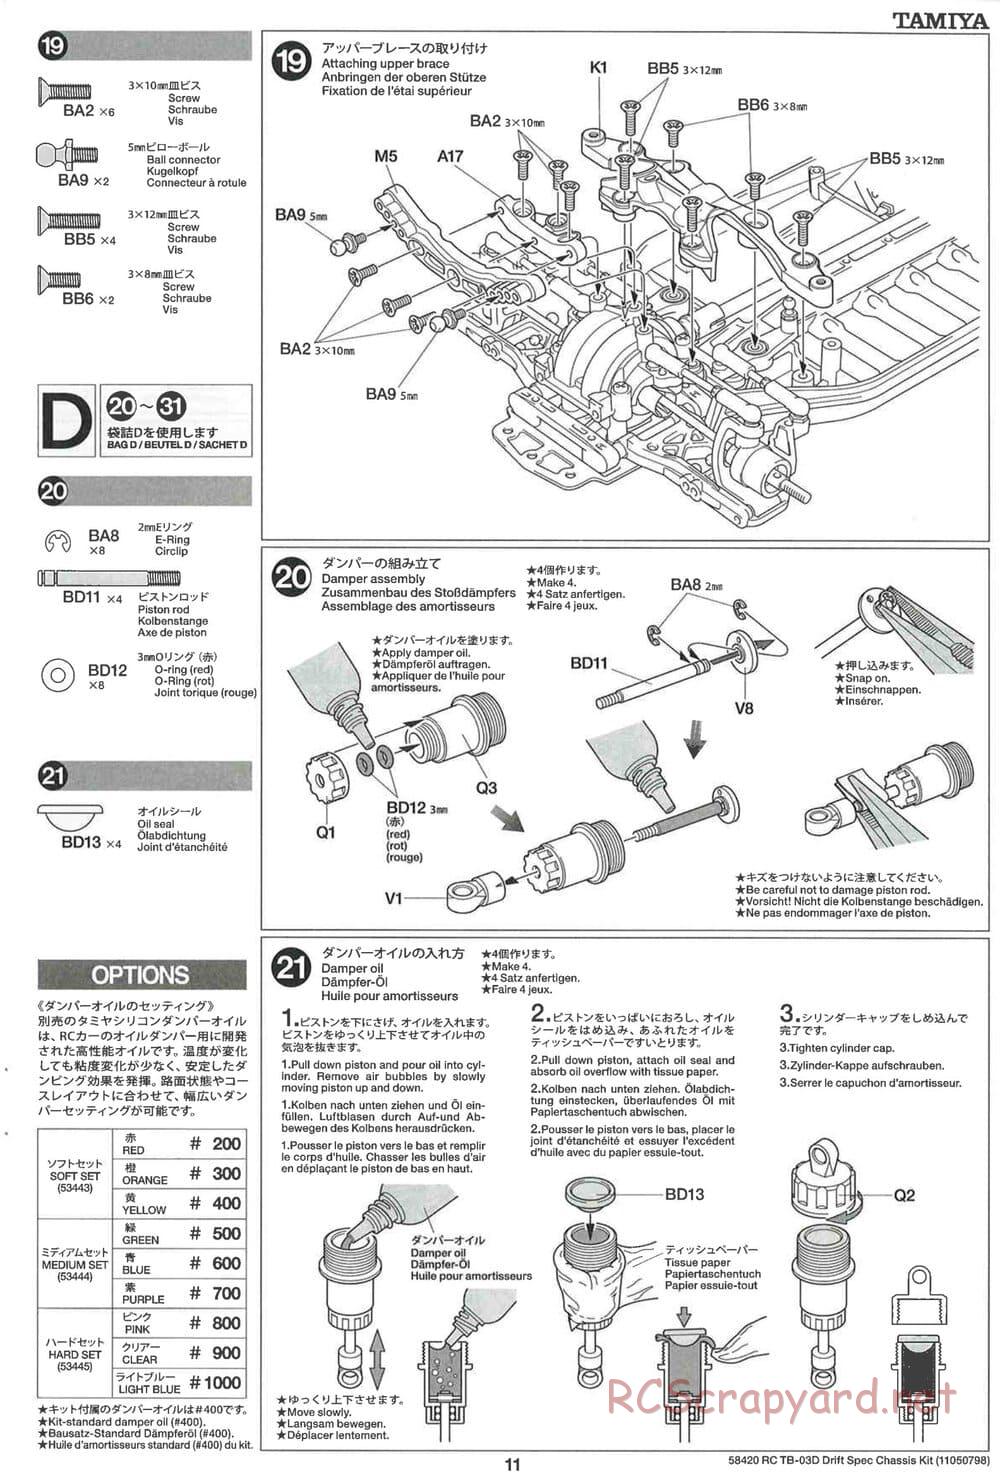 Tamiya - TB-03D HP Drift Spec Chassis - Manual - Page 11